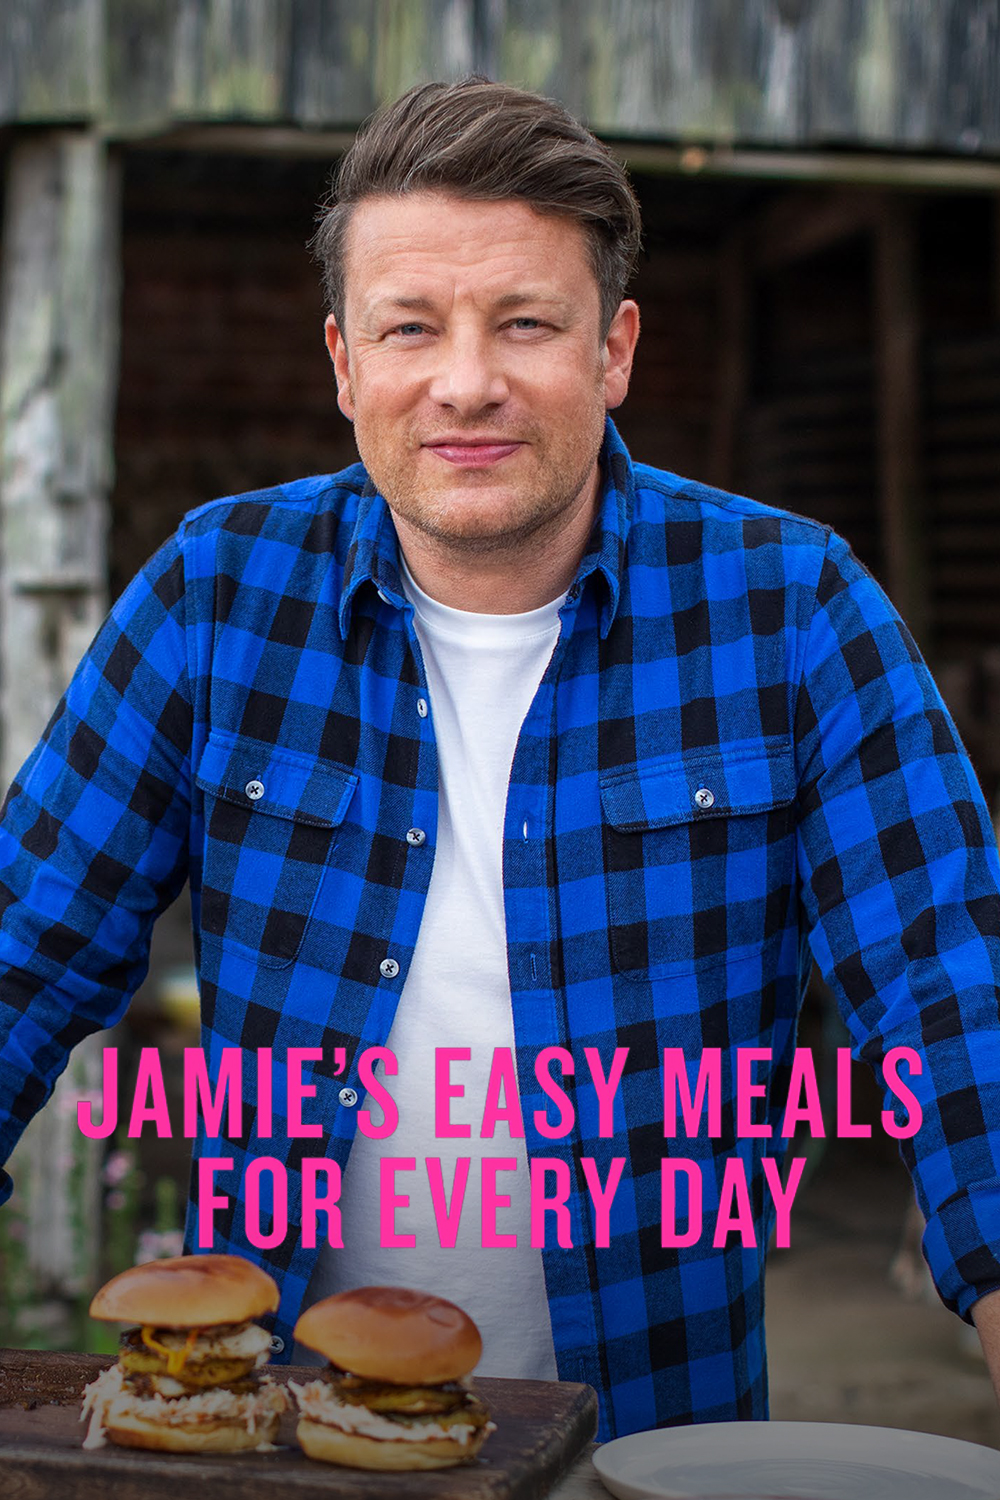 Jamie's Easy Meals For Every Day